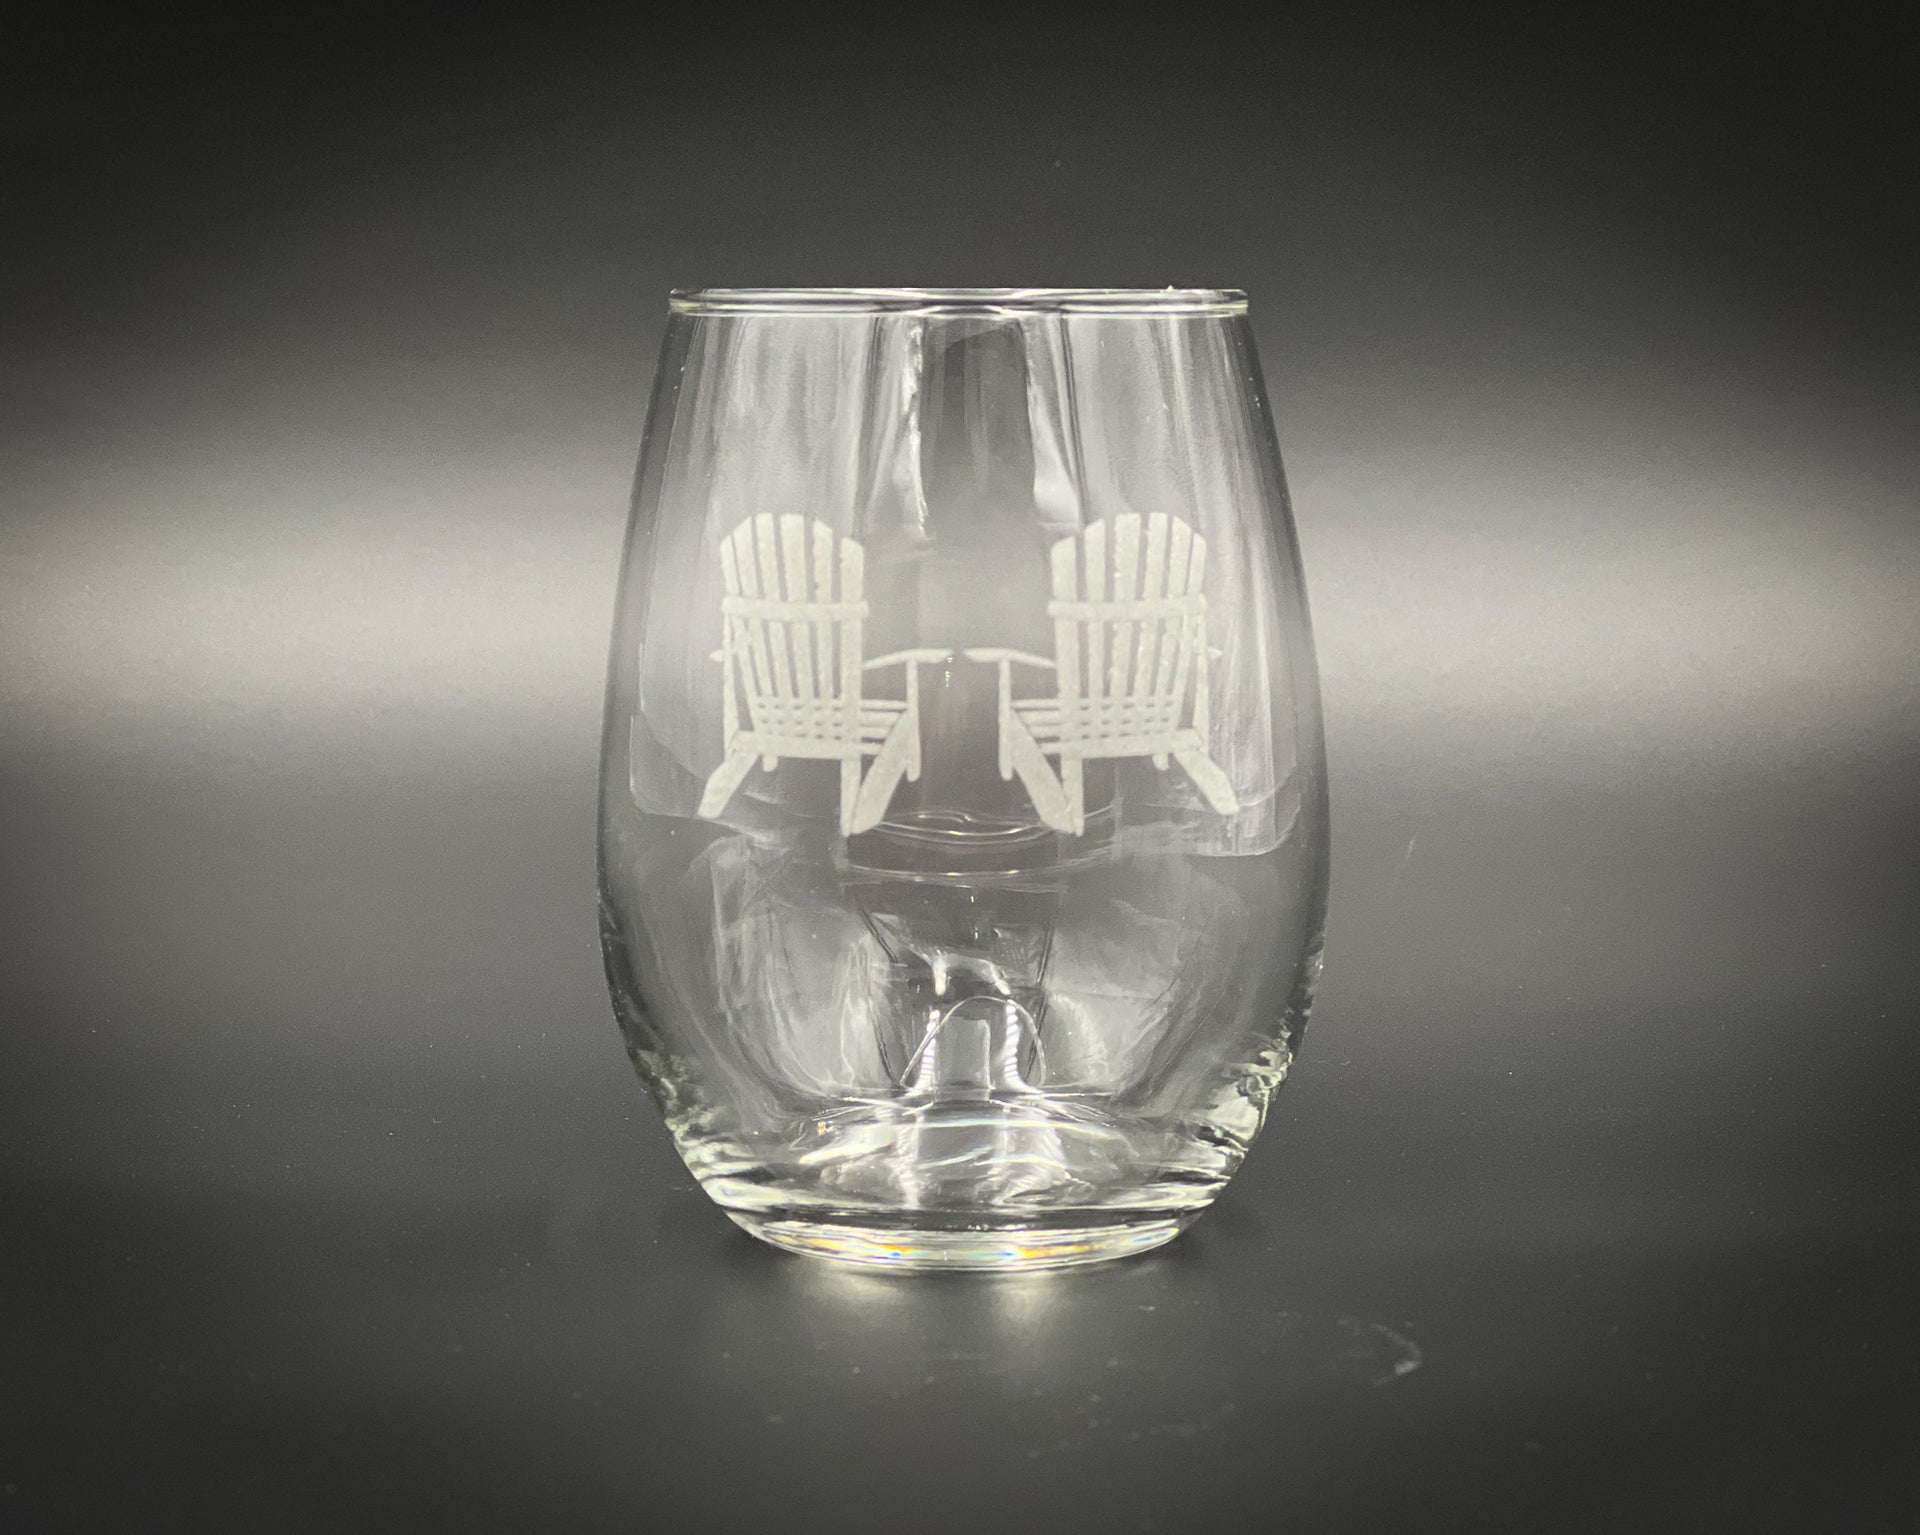 Pingry Etched Stemless Wine Glass 15 oz.